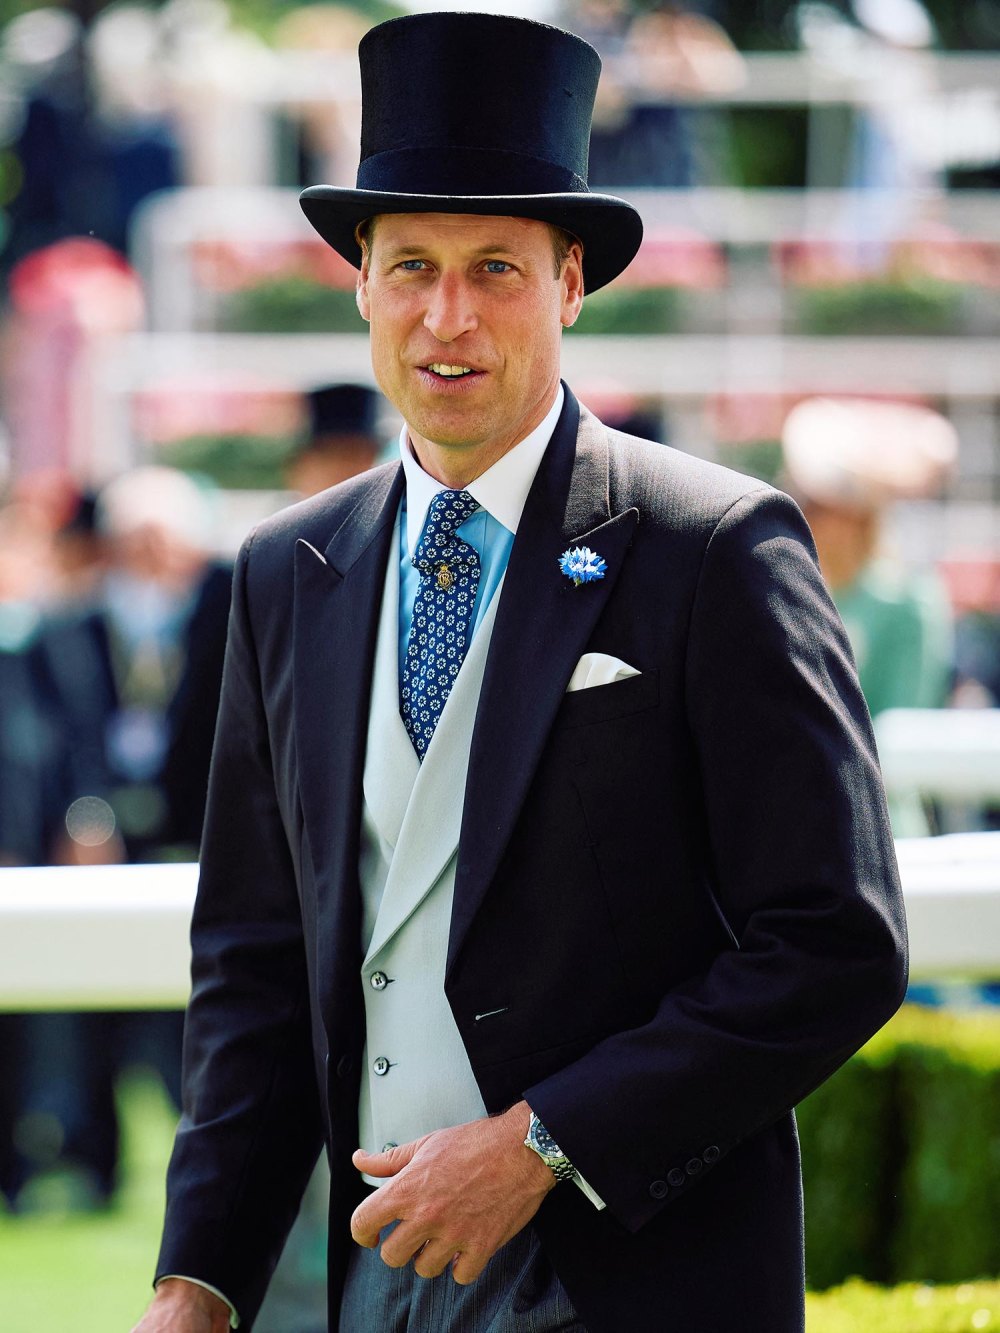 Prince William Seemingly Steps In for King Charles III for Day 2 of Royal Ascot